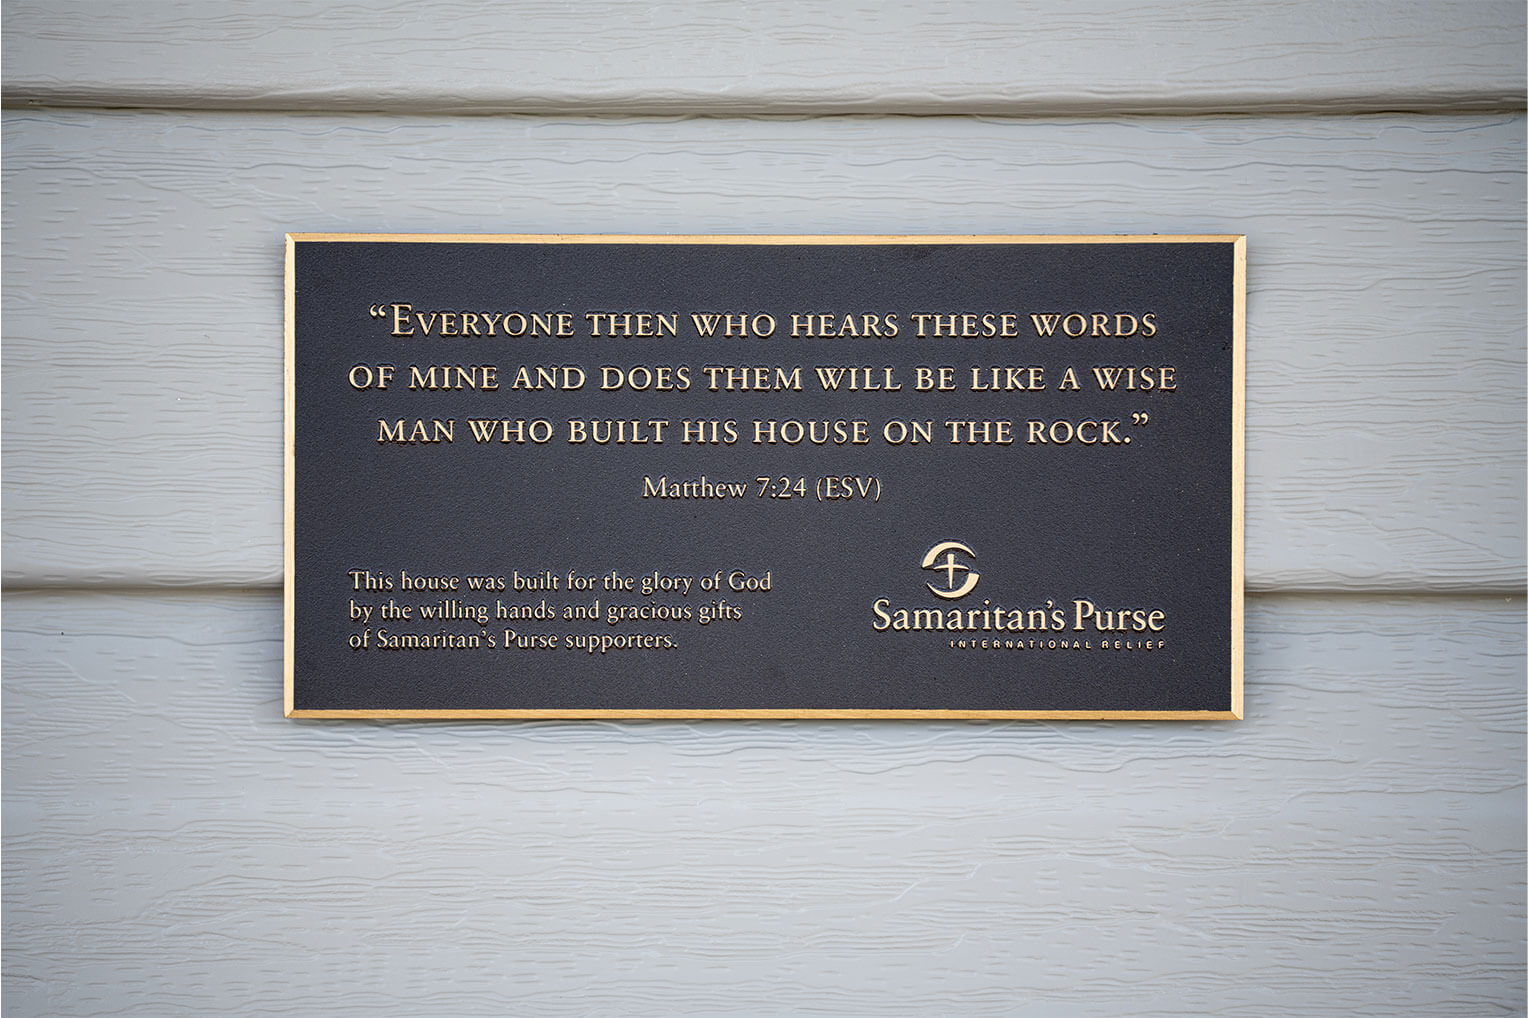 A plaque on Tom Woodward's home acknowledges Samaritan's Purse supporters.